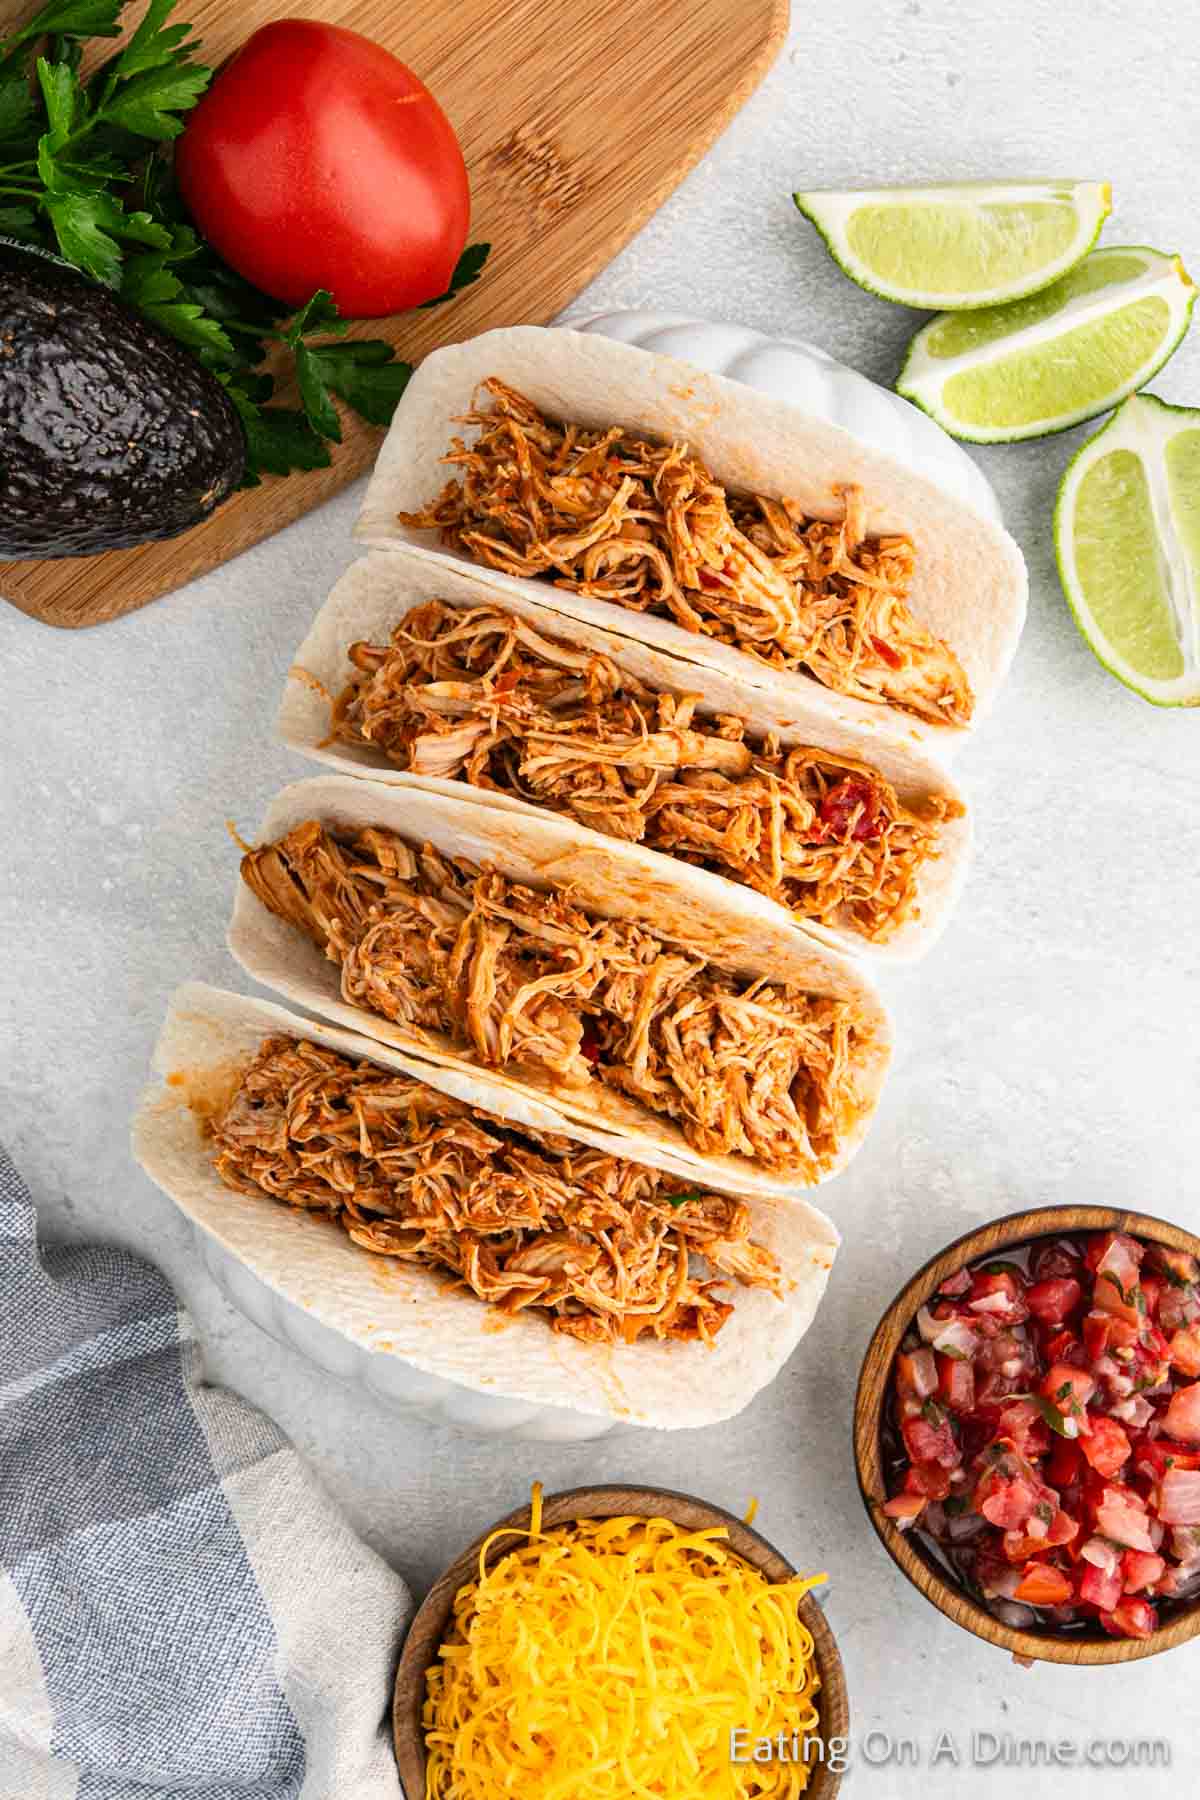 Shredded chicken placed in flour tortillas with a side of fresh limes